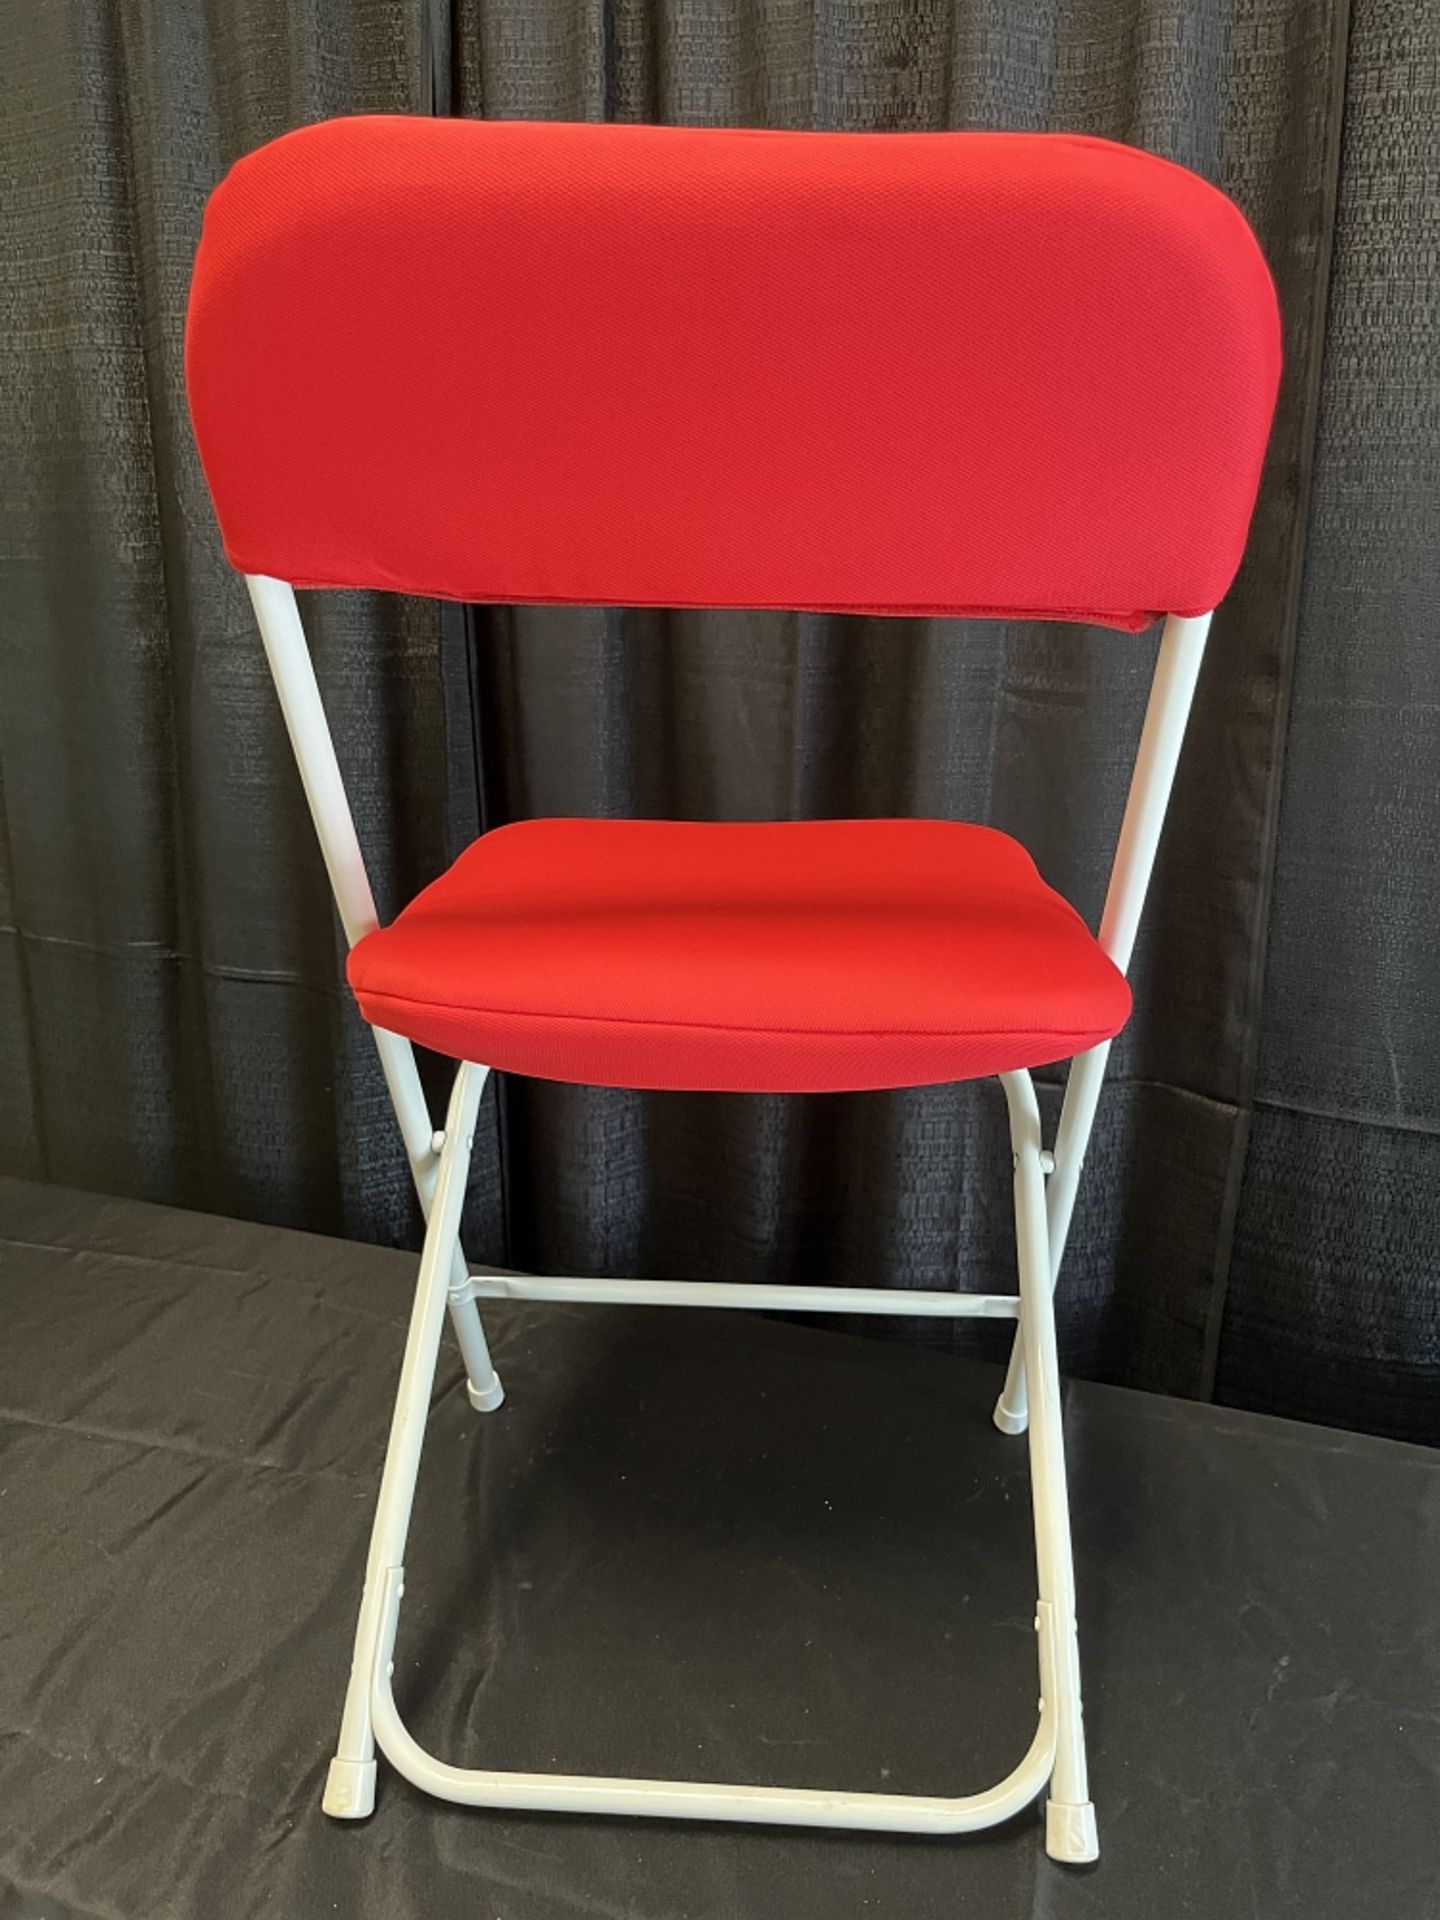 Chair Pad- Standard Back color: Red - Image 2 of 2